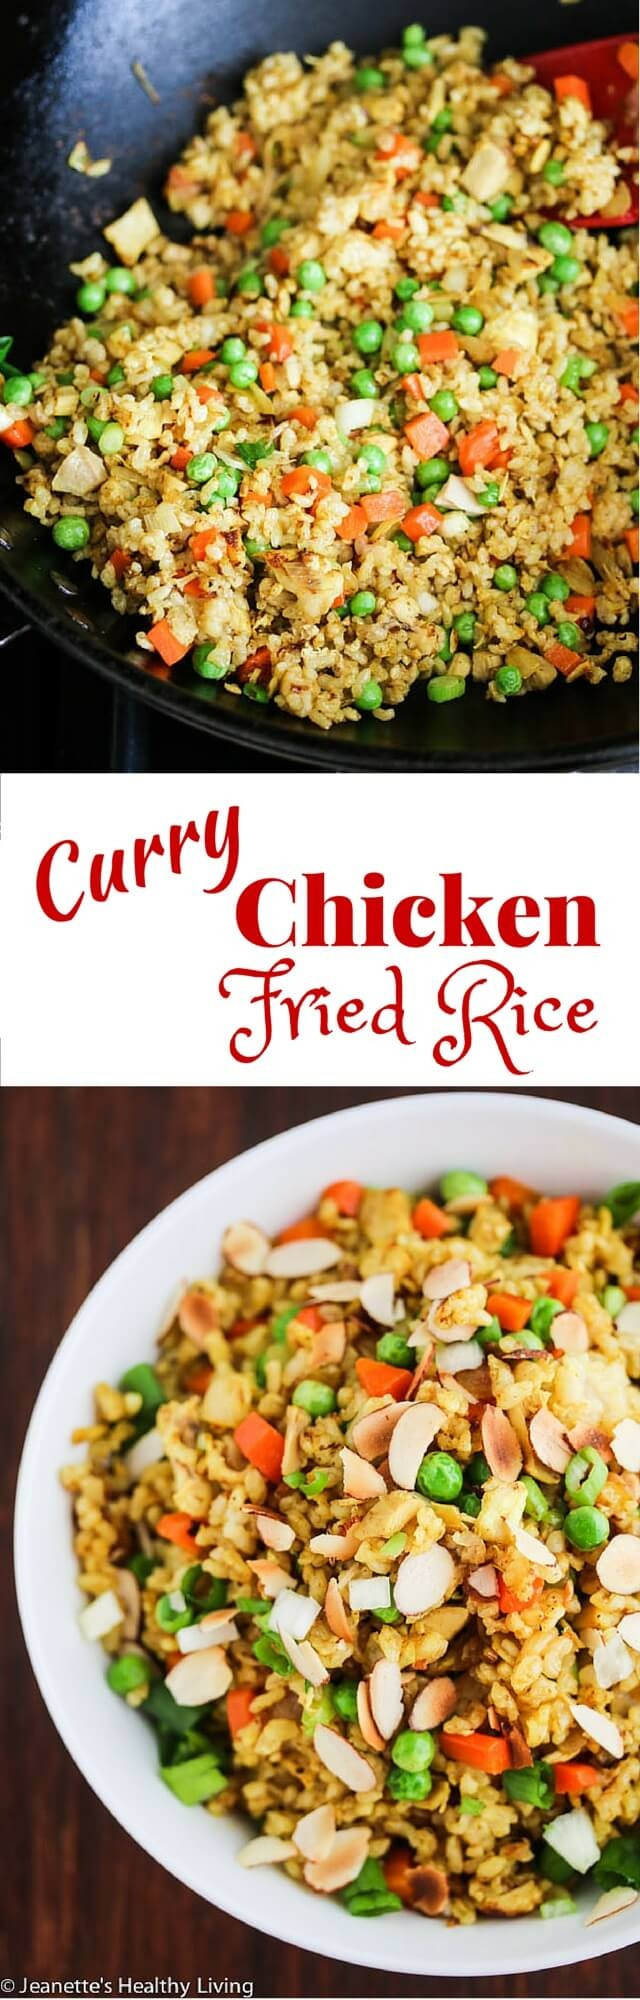 Side Dishes For Curry Chicken
 Chicken Curry Fried Rice Recipe Jeanette s Healthy Living